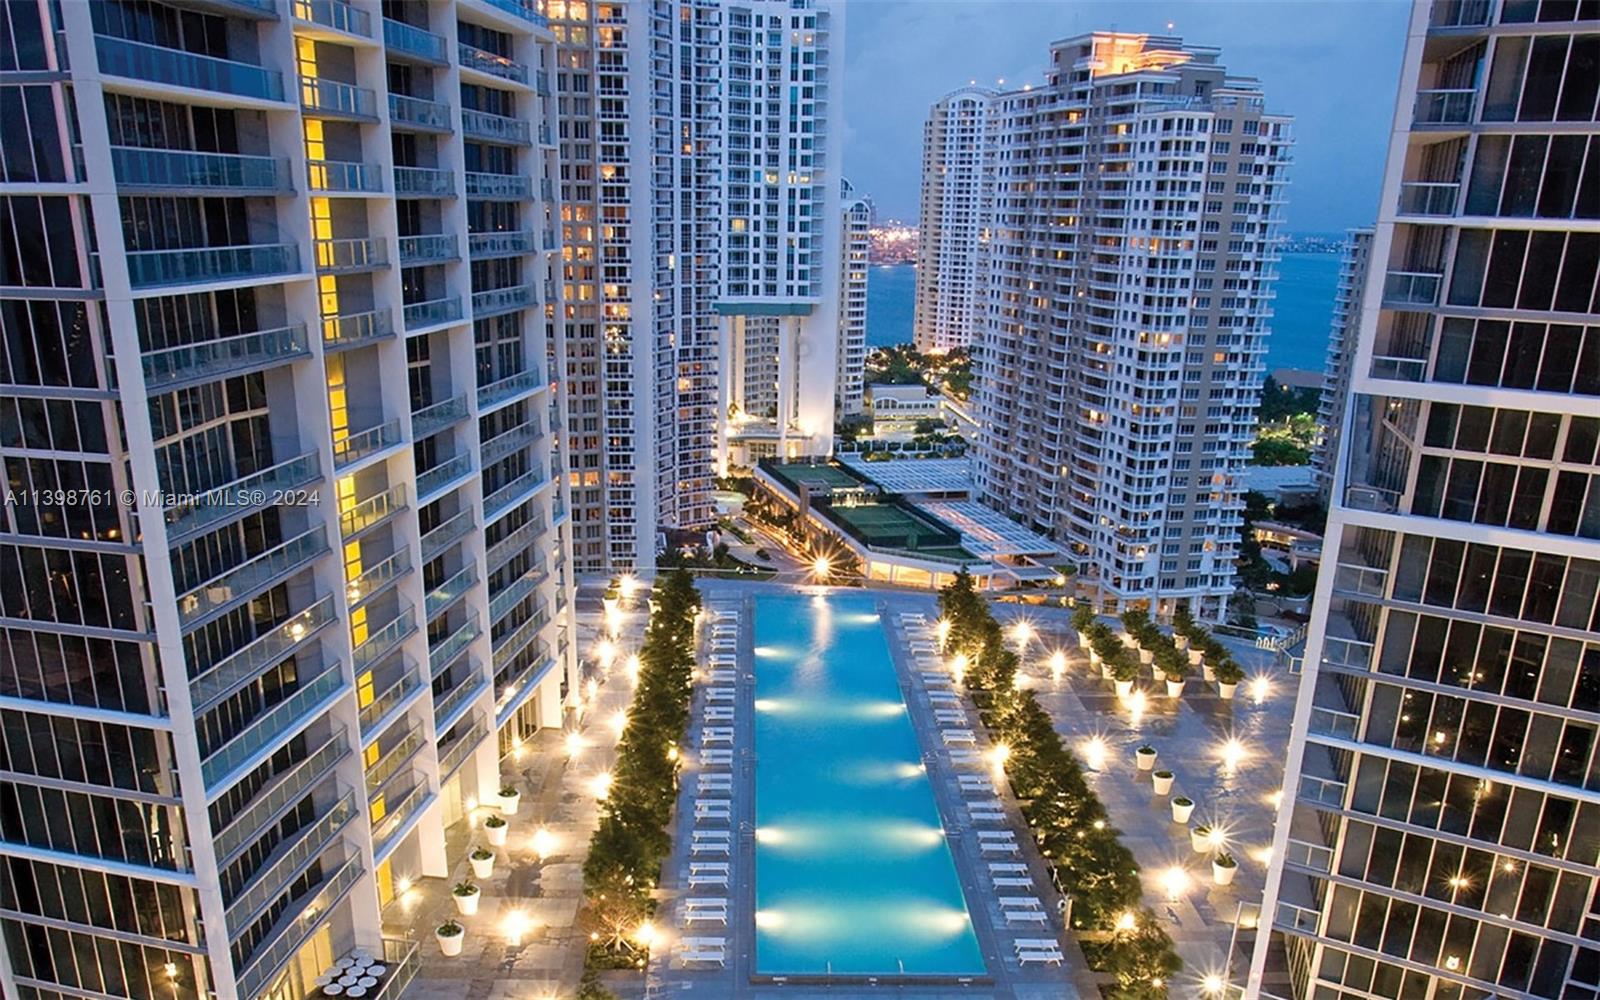 485 Brickell Ave 1803, Miami, Florida 33131, 1 Bedroom Bedrooms, ,1 BathroomBathrooms,Residential,For Sale,485 Brickell Ave 1803,A11398761